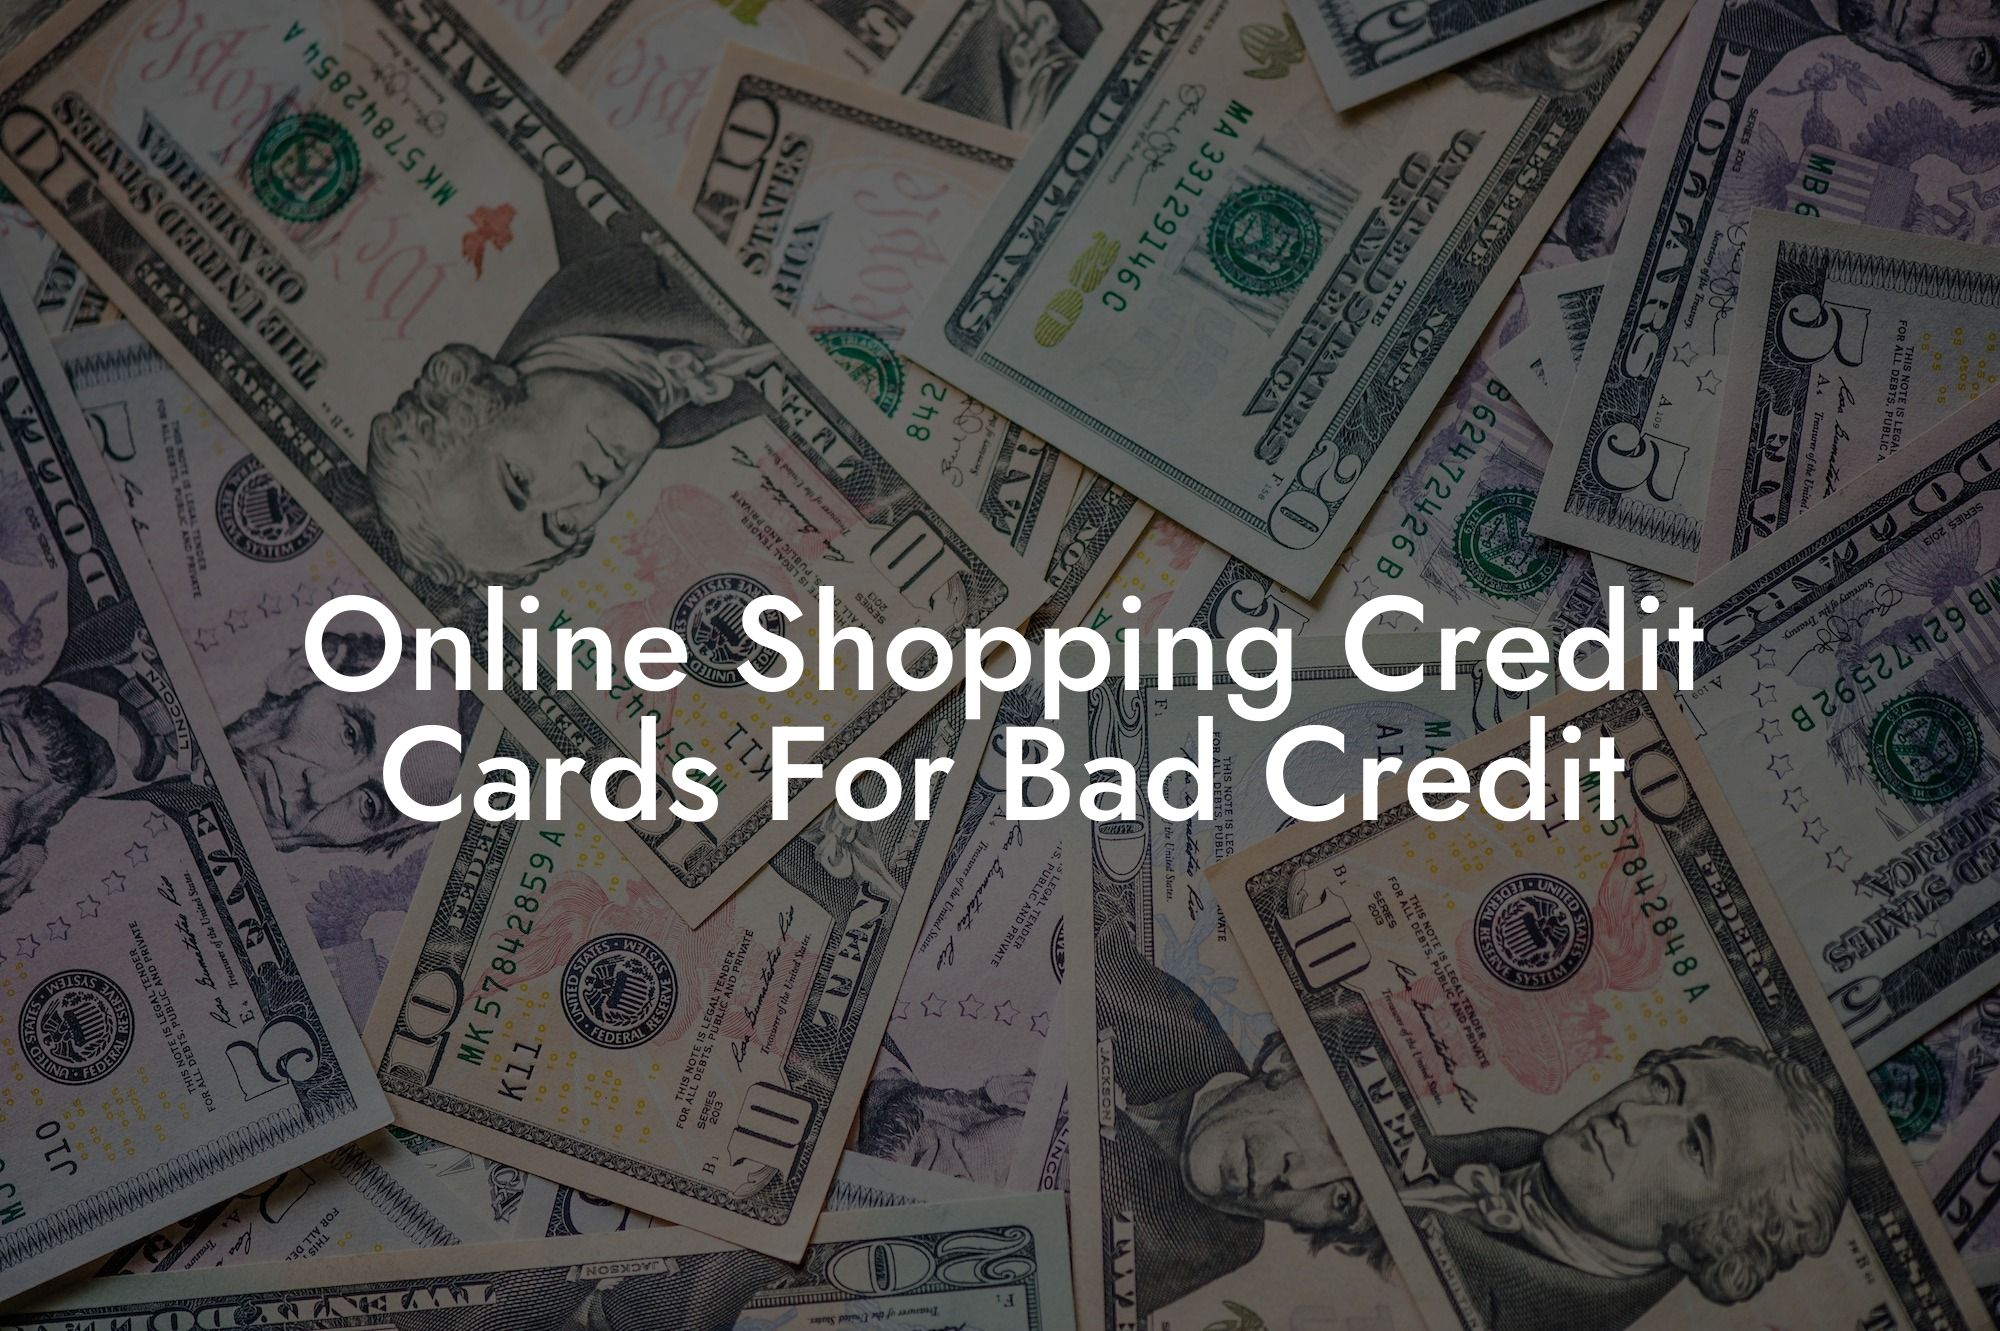 Online Shopping Credit Cards For Bad Credit